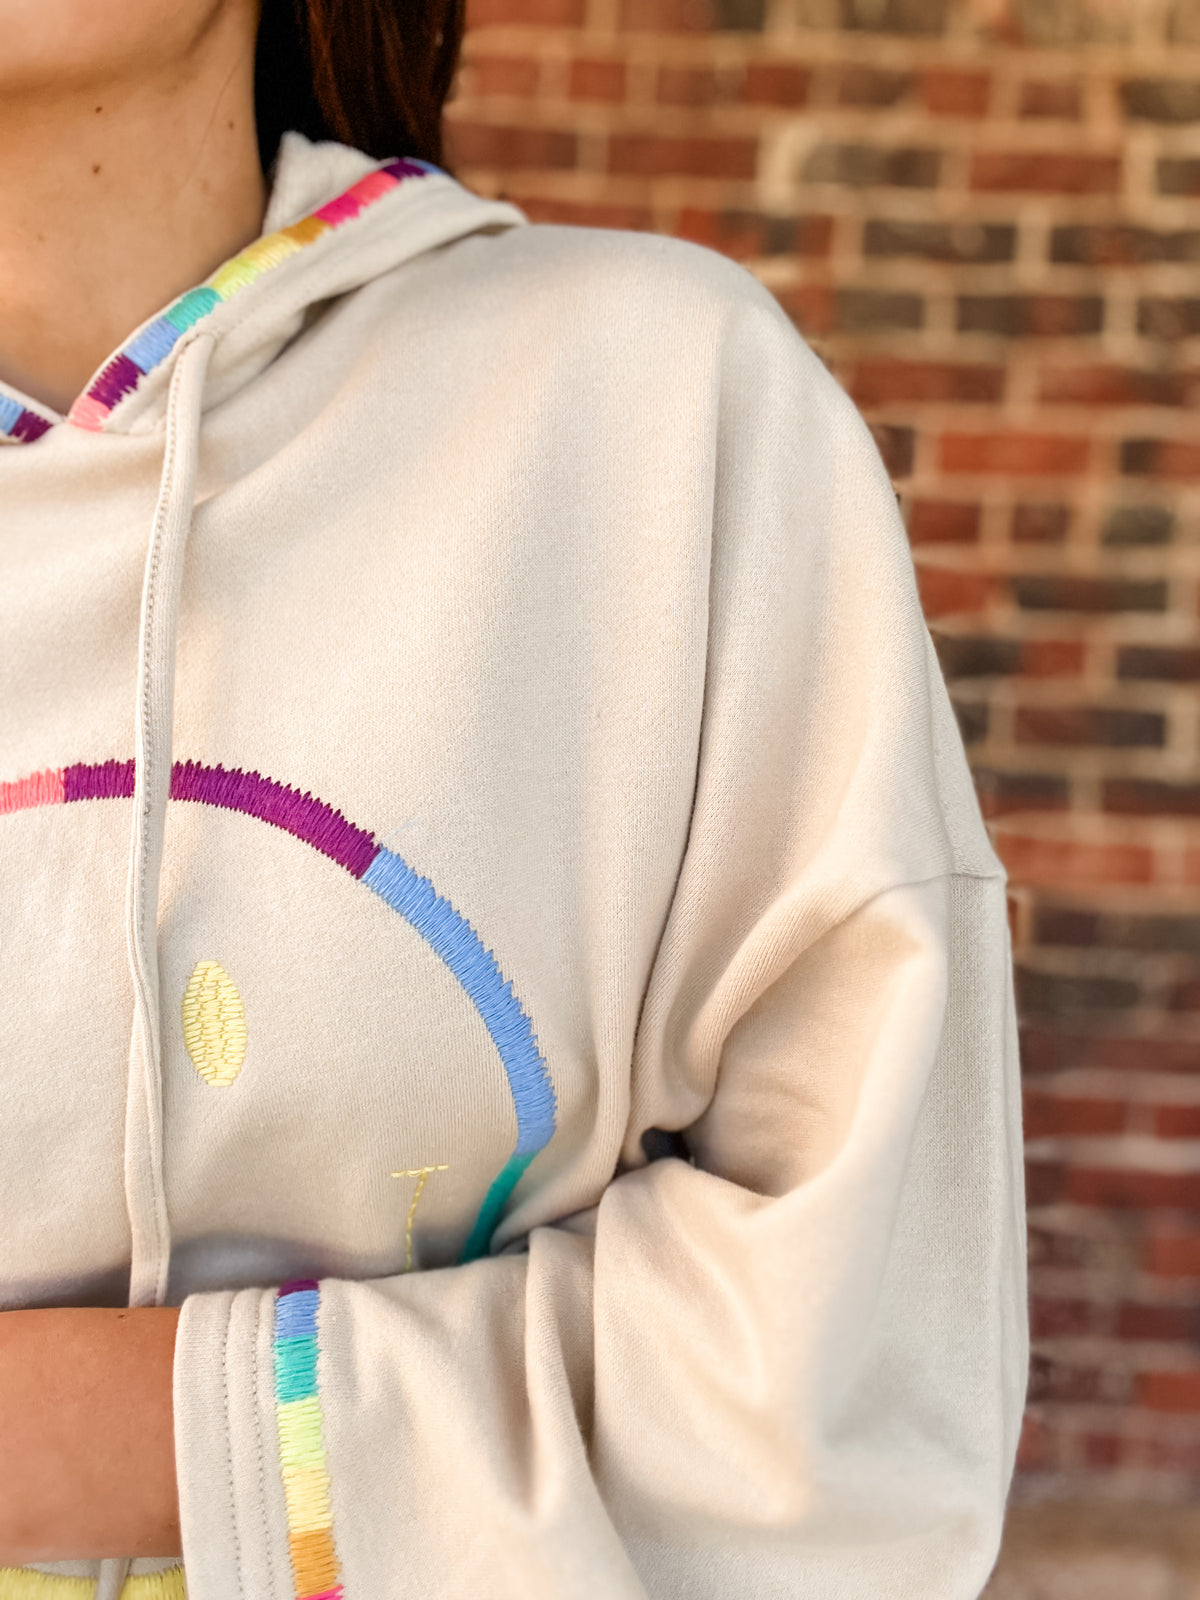 Smiley Face Embroidery Hooded Top